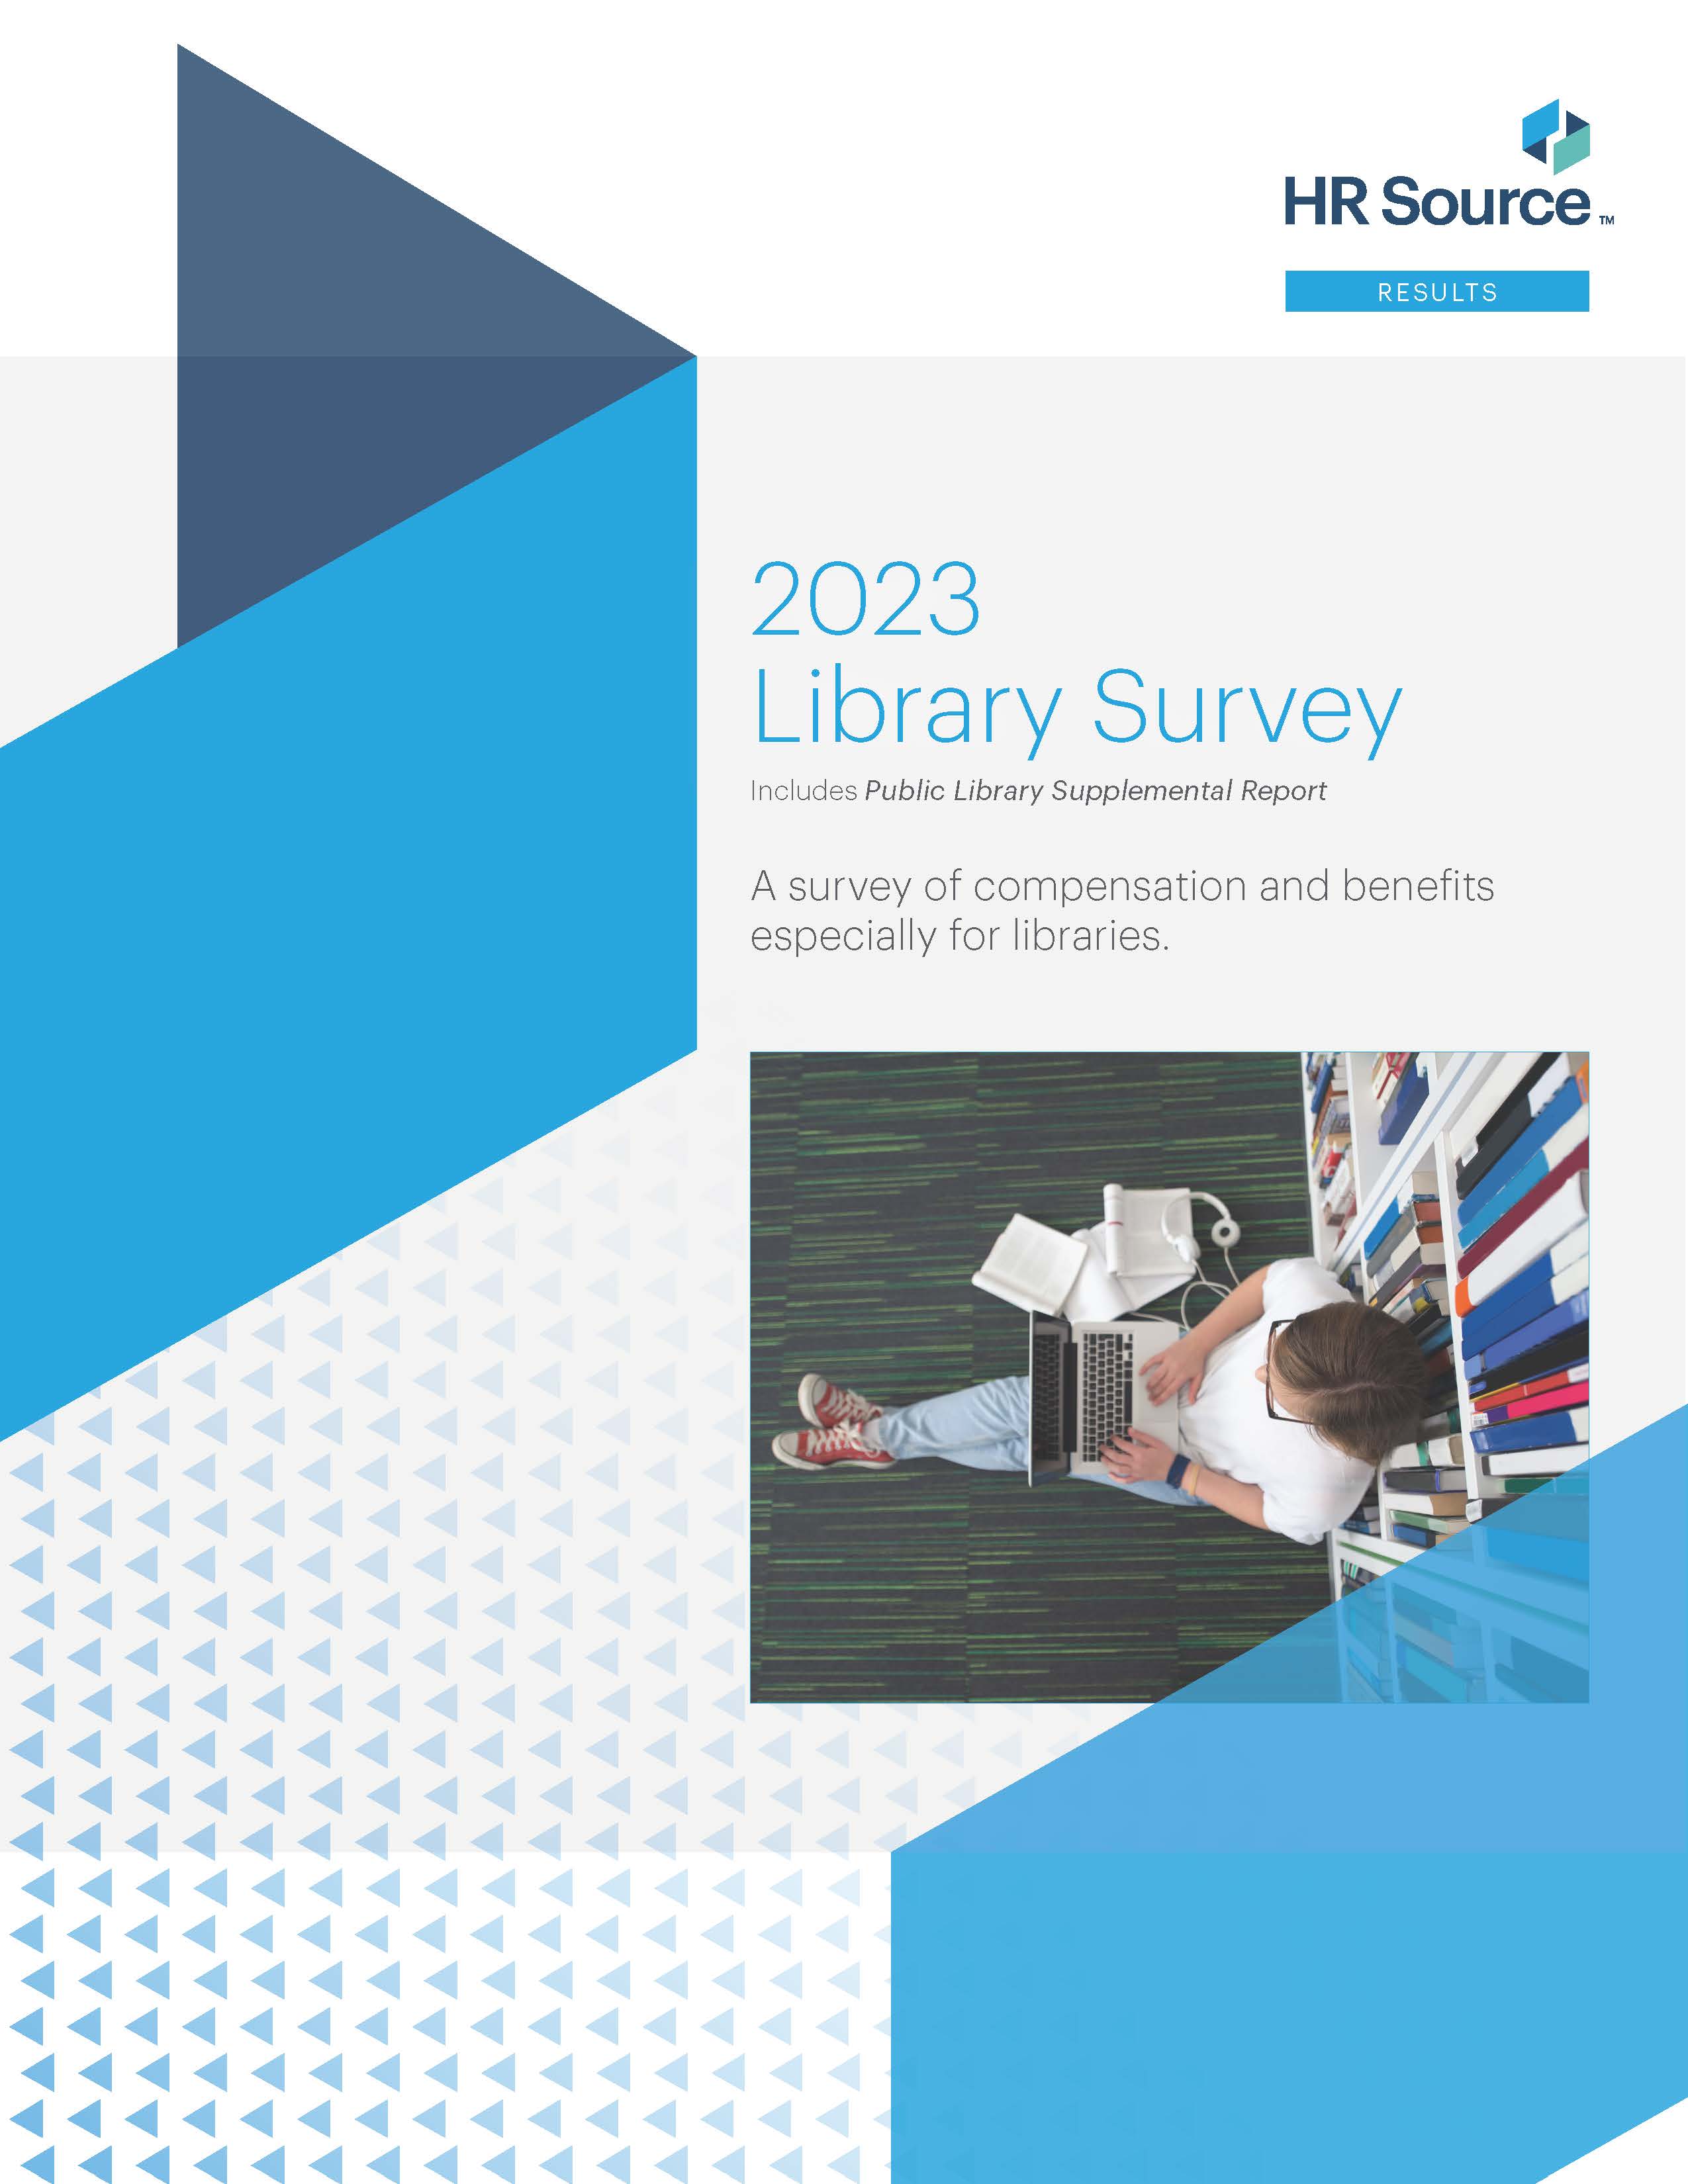 Public Library Supplemental Report 2023